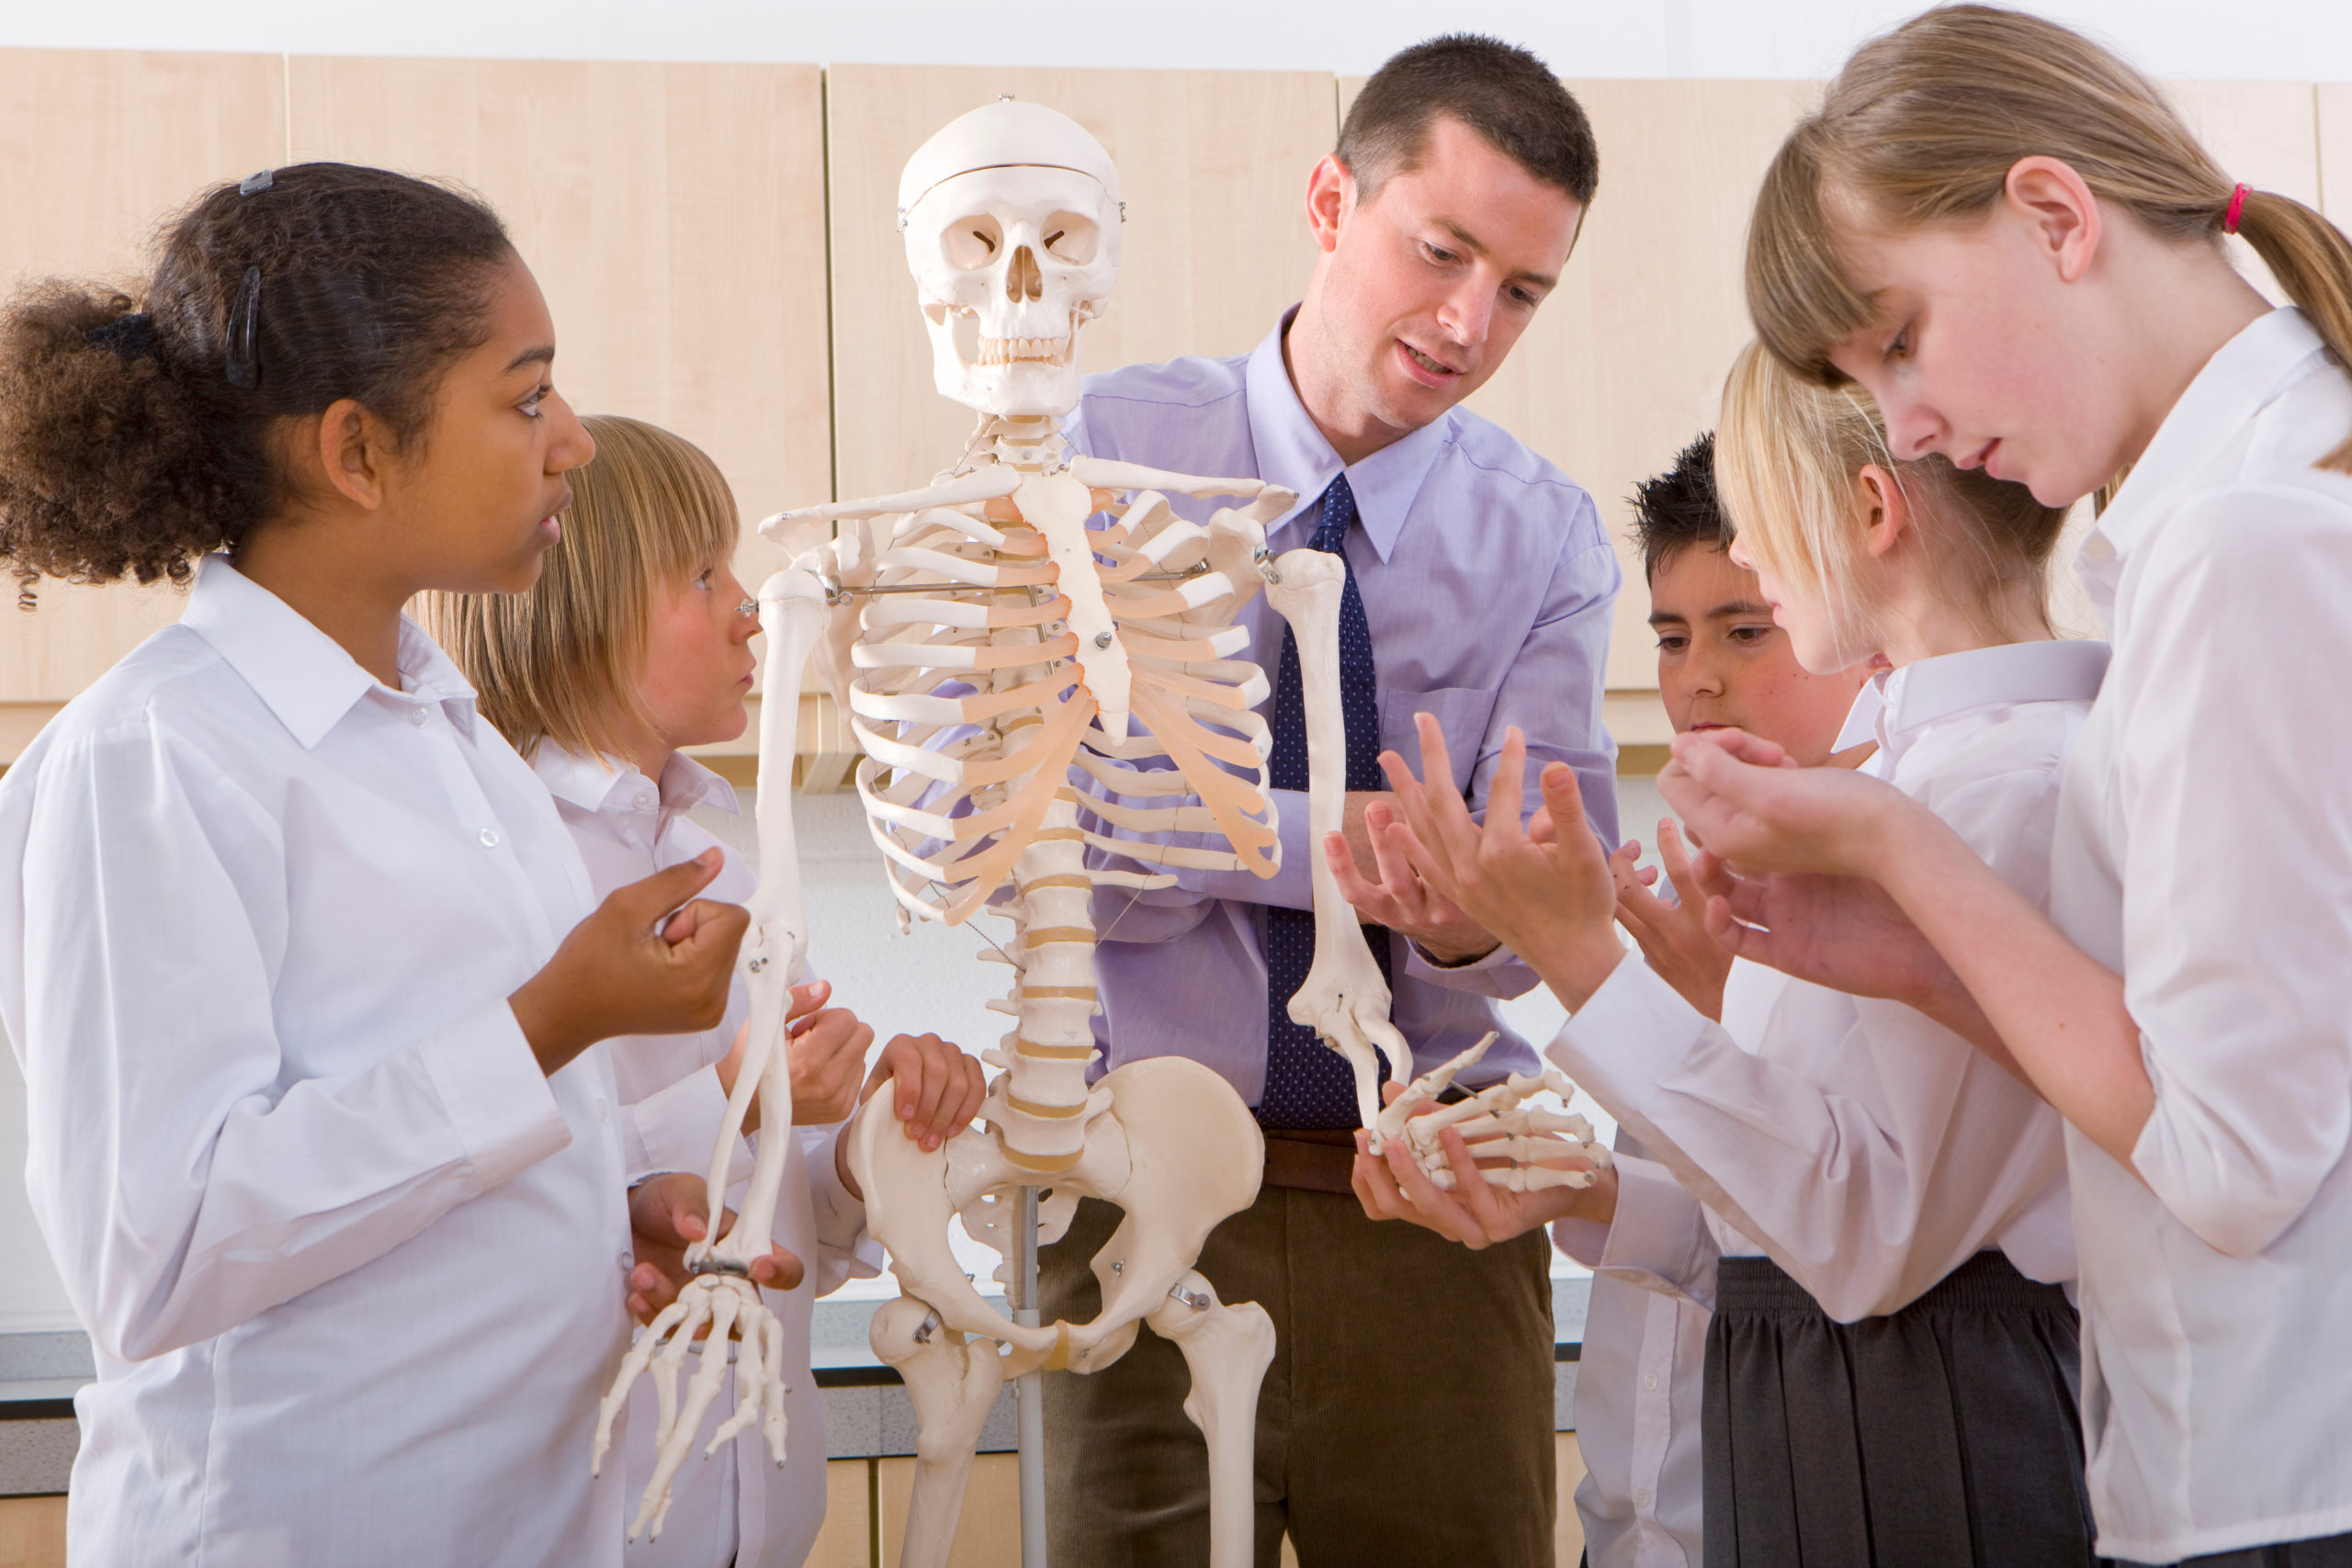 The science teacher shows a skeleton to a group of school children. 